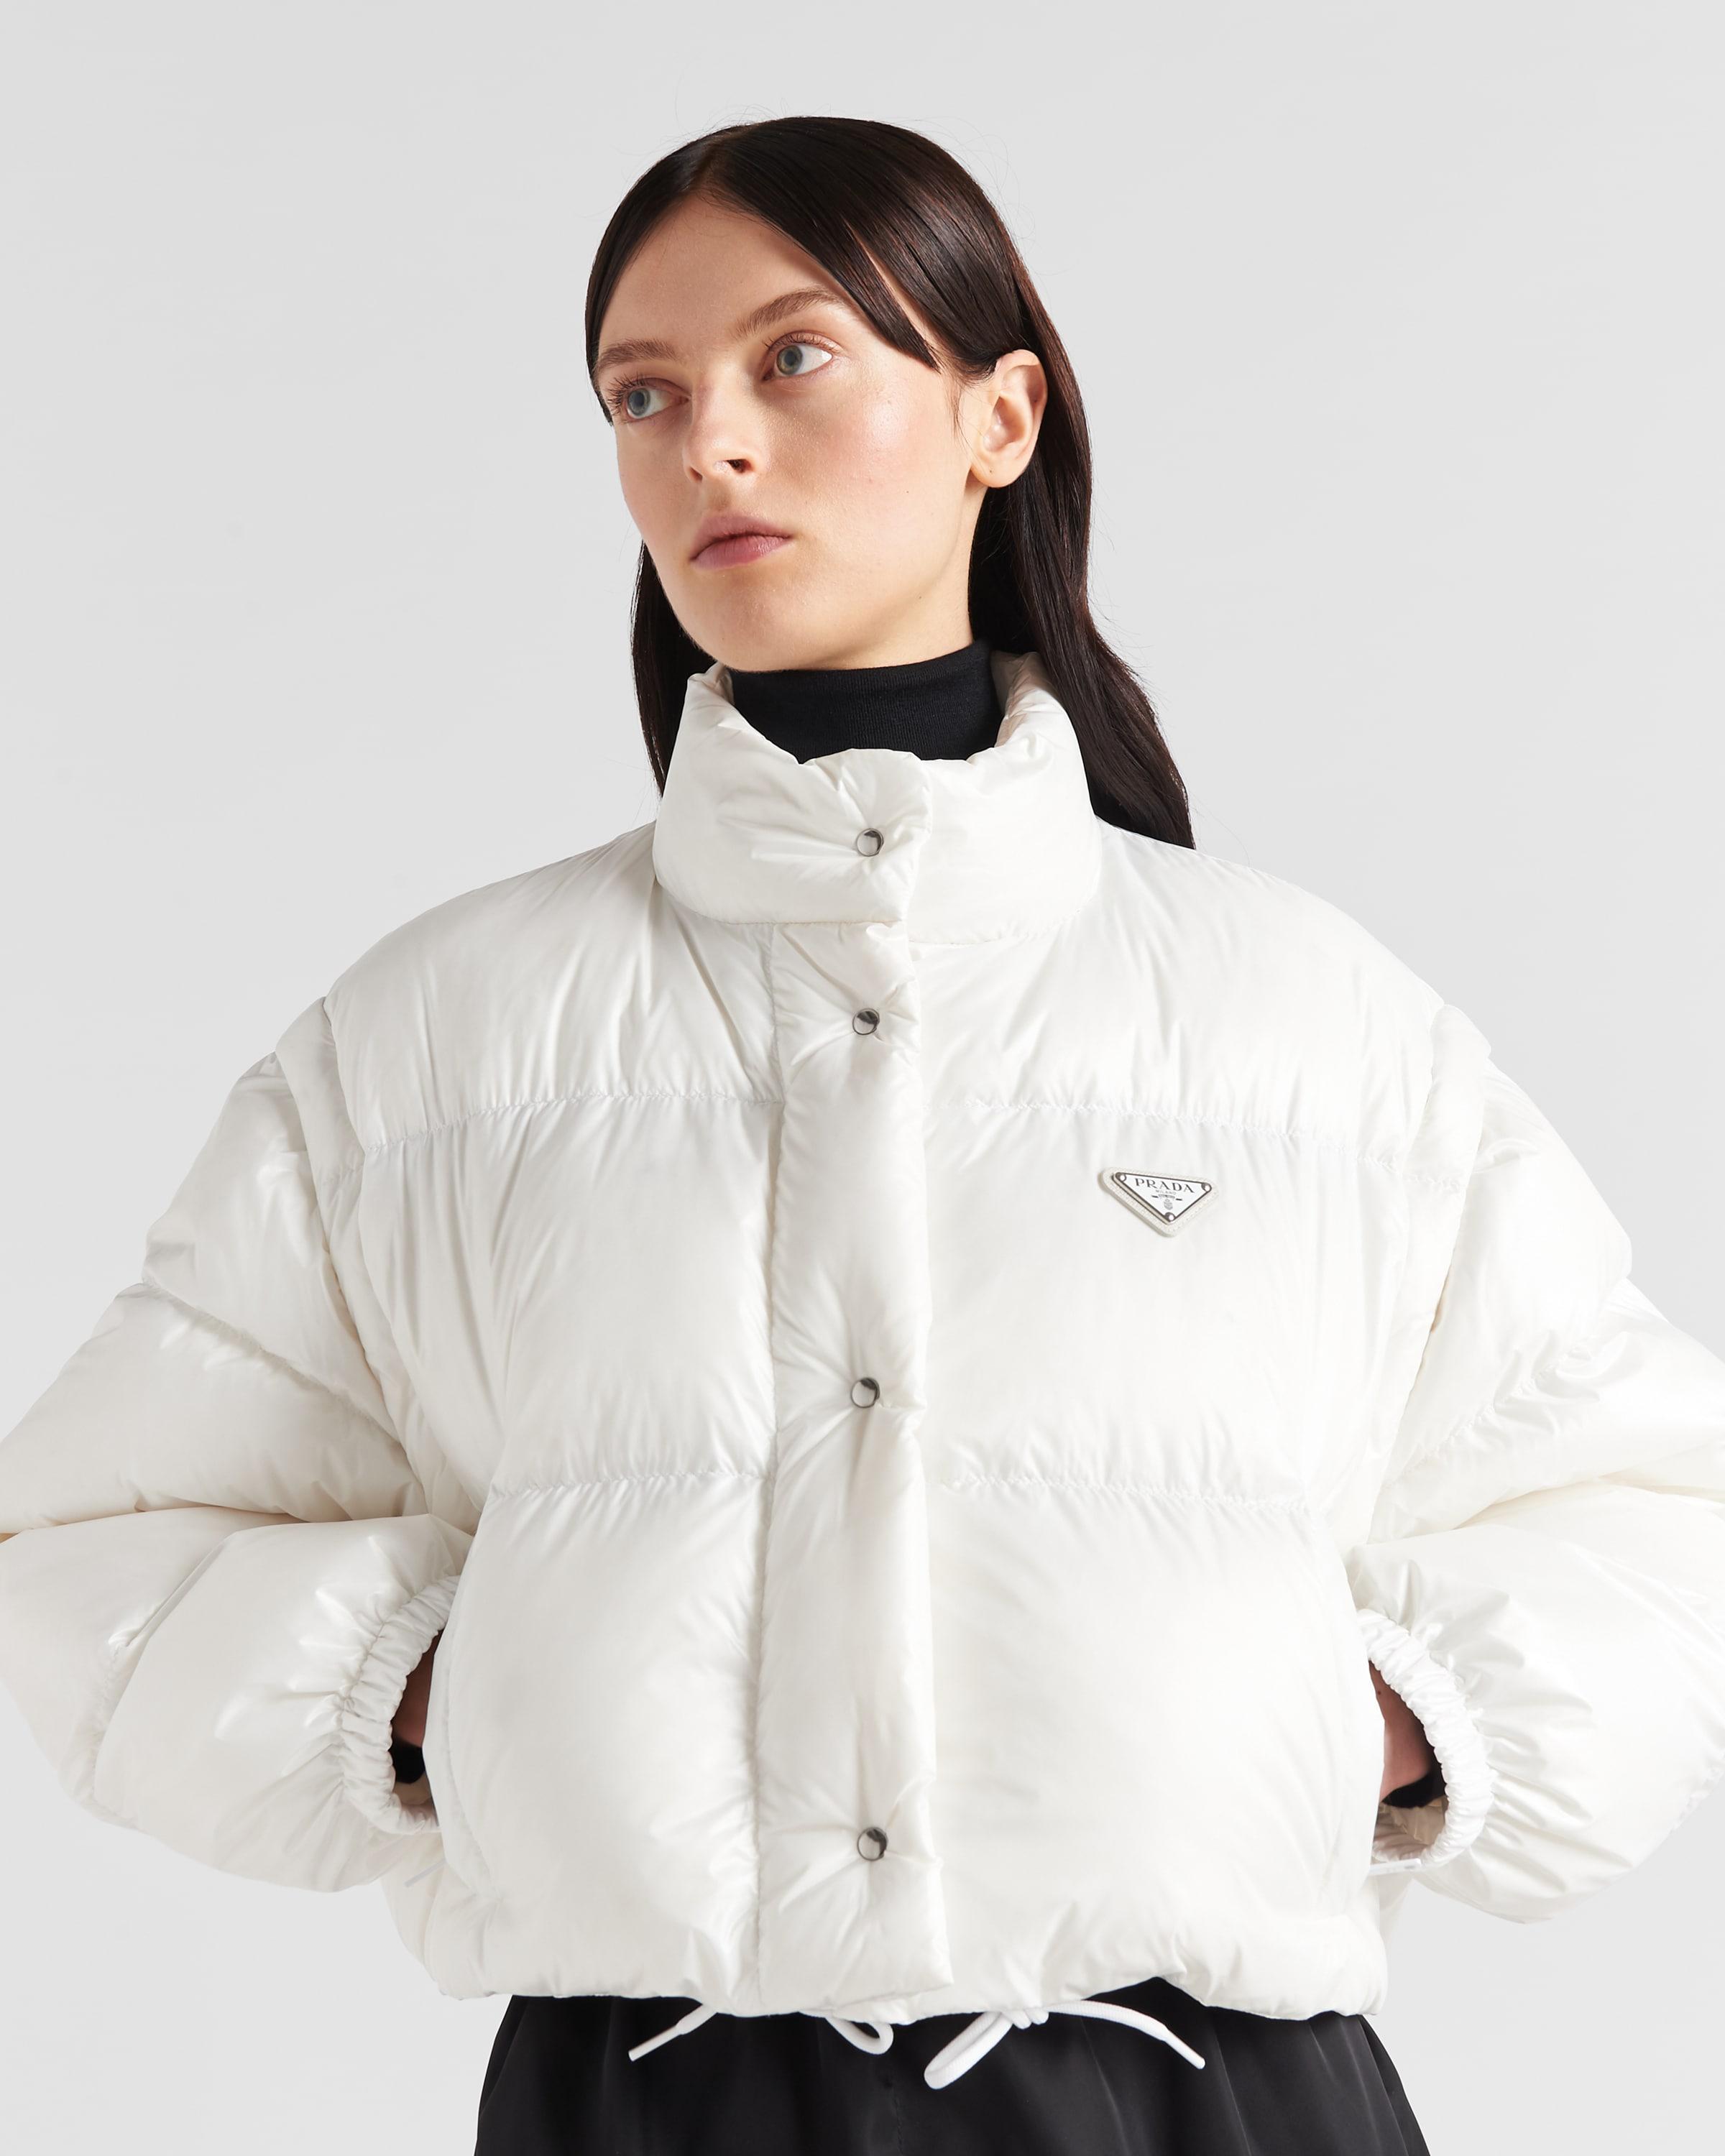 Prada Re-nylon Cropped Puffer Jacket In White Lyst, 59% OFF